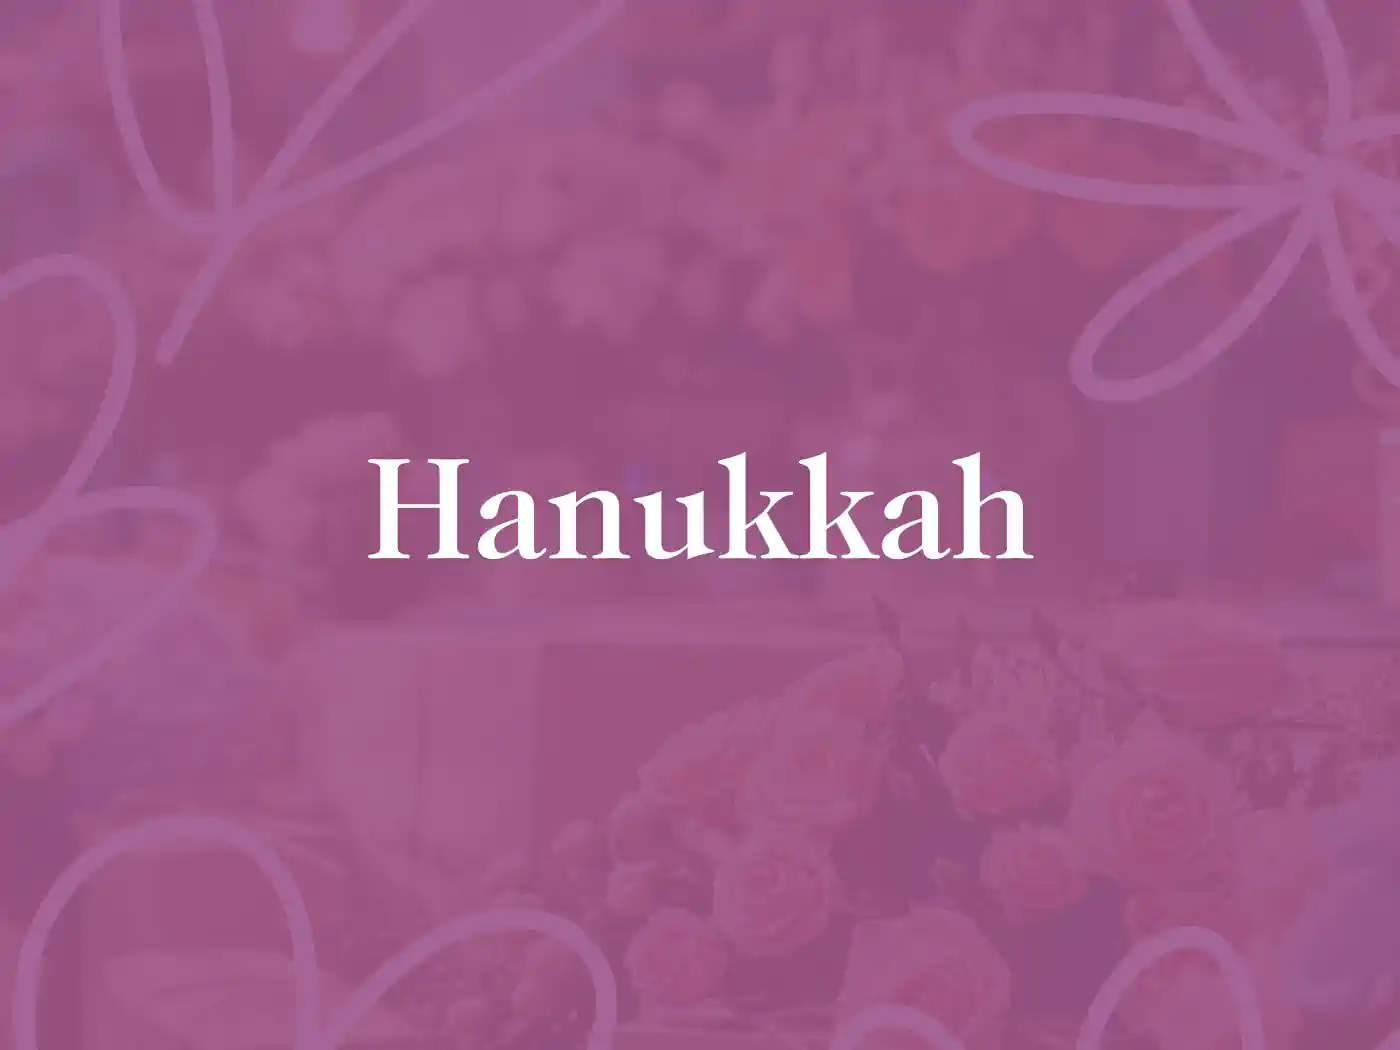 A vibrant purple background with "Hanukkah" written in elegant white text. Fabulous Flowers and Gifts - Hanukkah Collection.